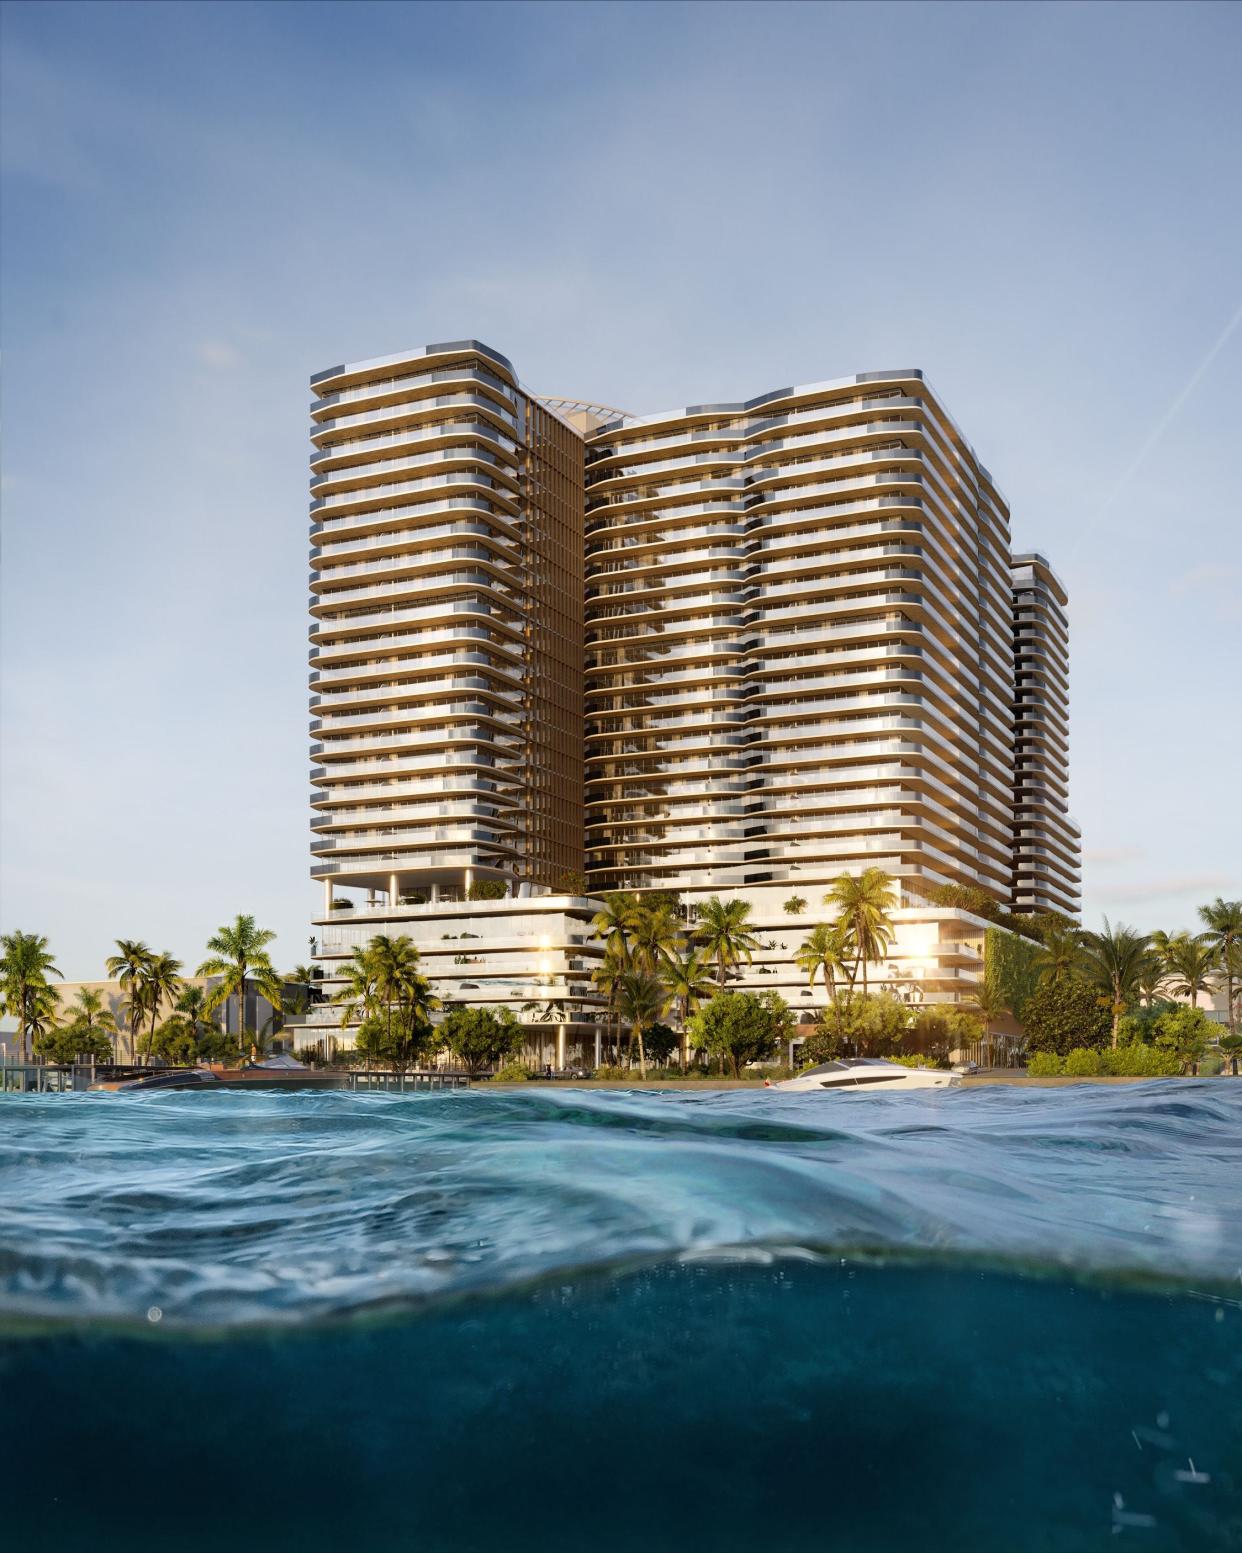 A rendering of the new two-tower complex Olara, which was approved Dec. 20 by the City of West Palm Beach's planning board for 1919 N. Flagler Drive.